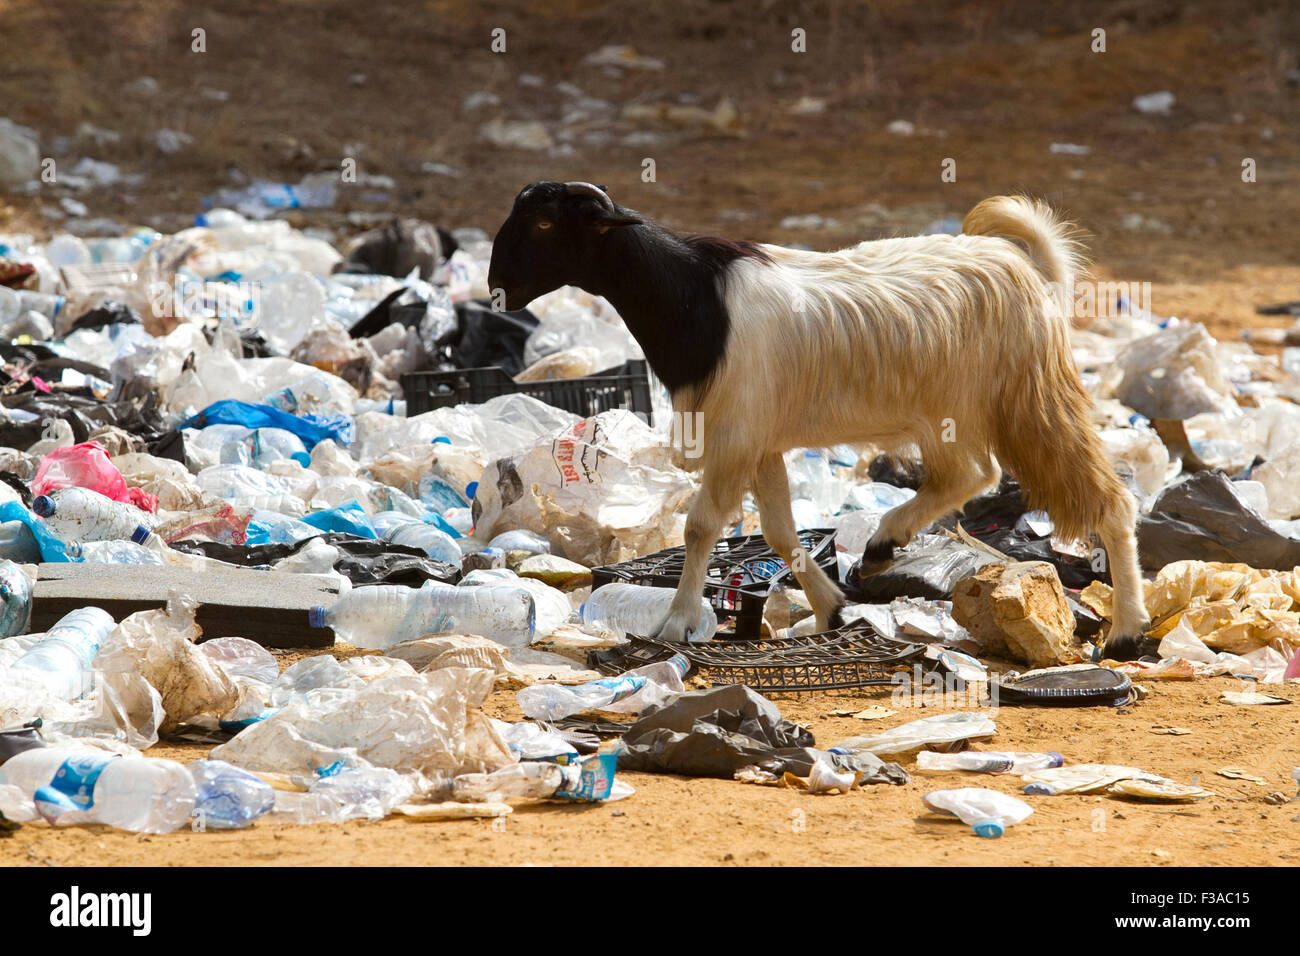 Beirut Lebanon 3rd October 2015. Goats rummaging for food in a rubbish dump and  discarded plastic bottles and bags as local municipalities struggle to cope with the amount of human waste  creating temporary landfill sites. The uncollected rubbish triggered the civil You Stink protest again perceived corruption of politicians Credit:  amer ghazzal/Alamy Live News Stock Photo